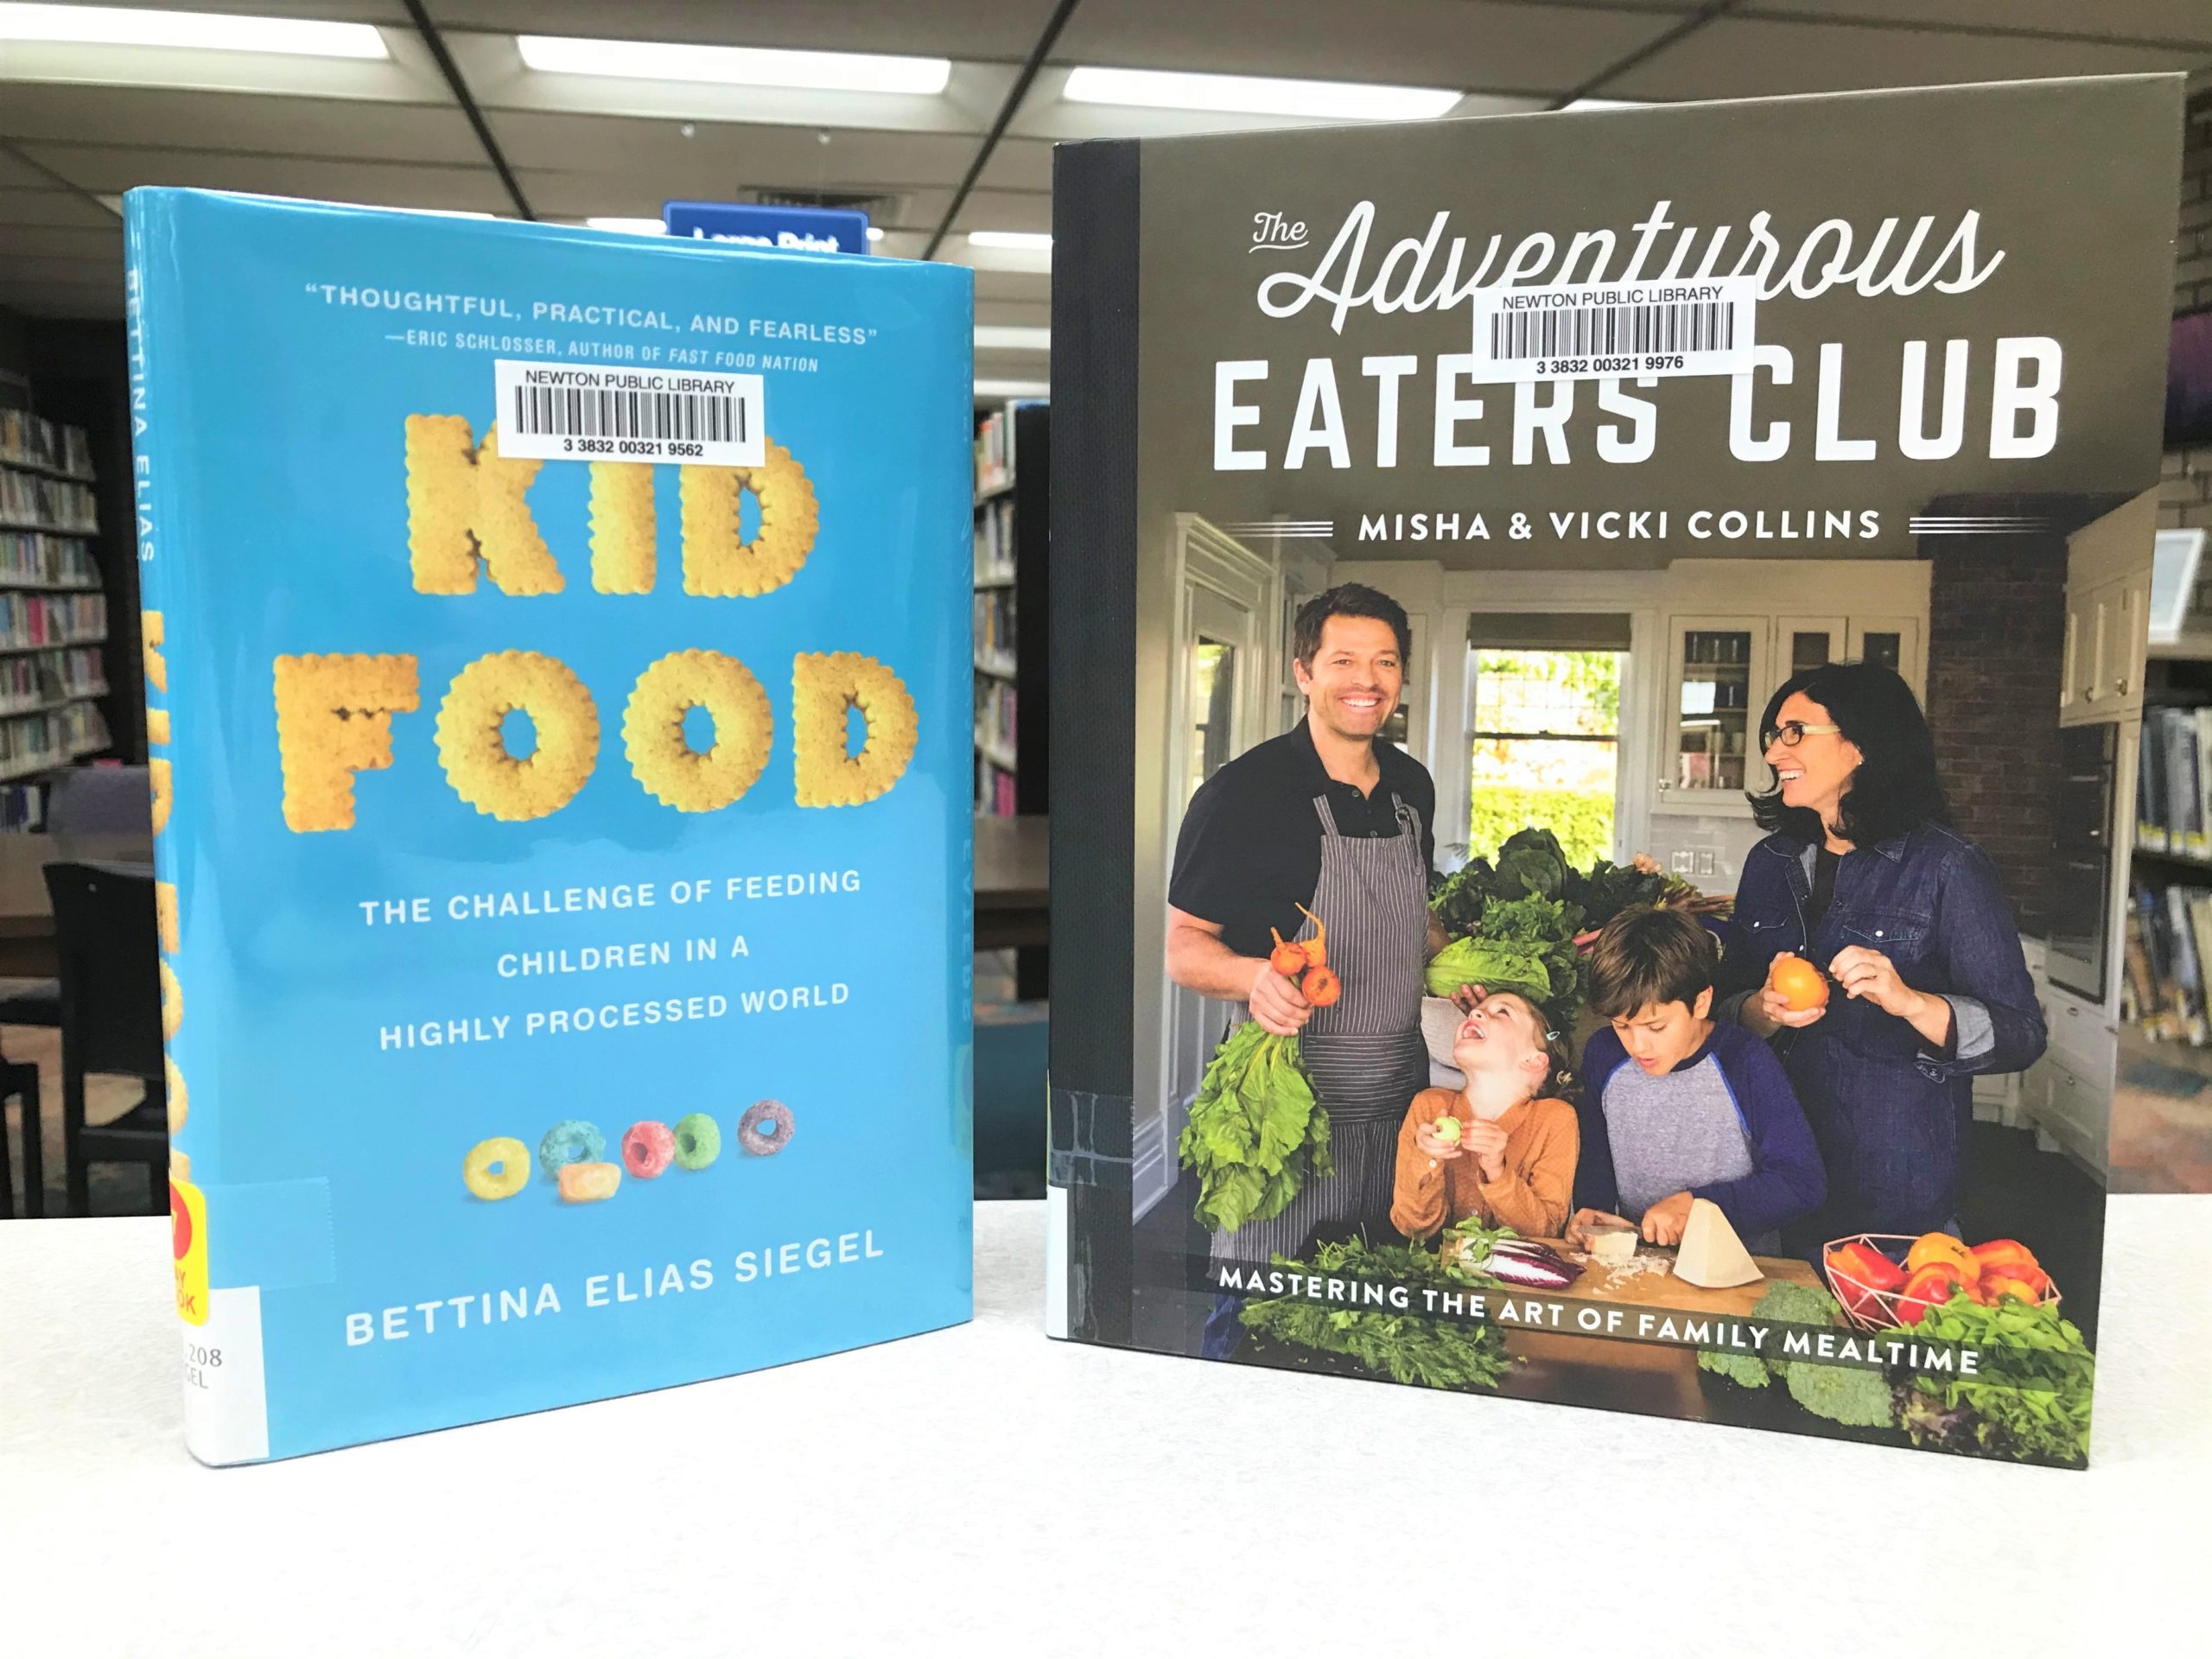 Covers of "Kid Food" and "The Adventurous Eaters Club"